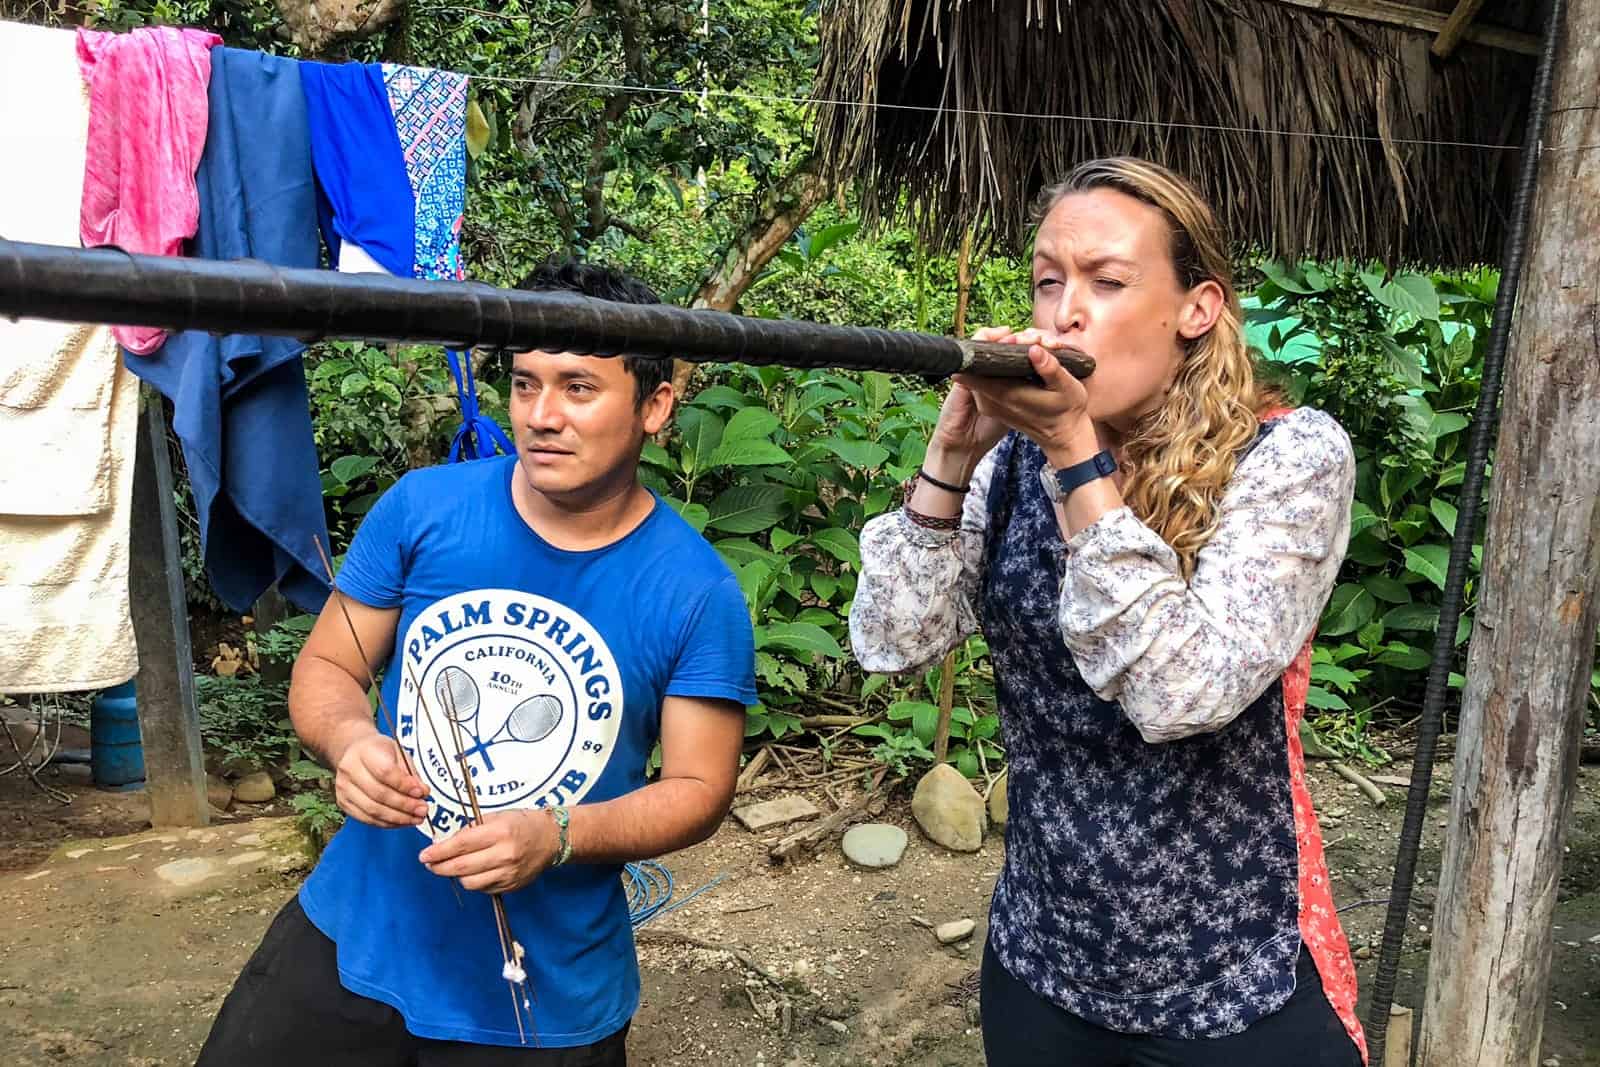 A woman blowing into the black tube of a Blowgun in Ecuador Amazon Rainforest, while a man in a blue t-shirt next to her watches the target. Behind them is a clothes washing line. 